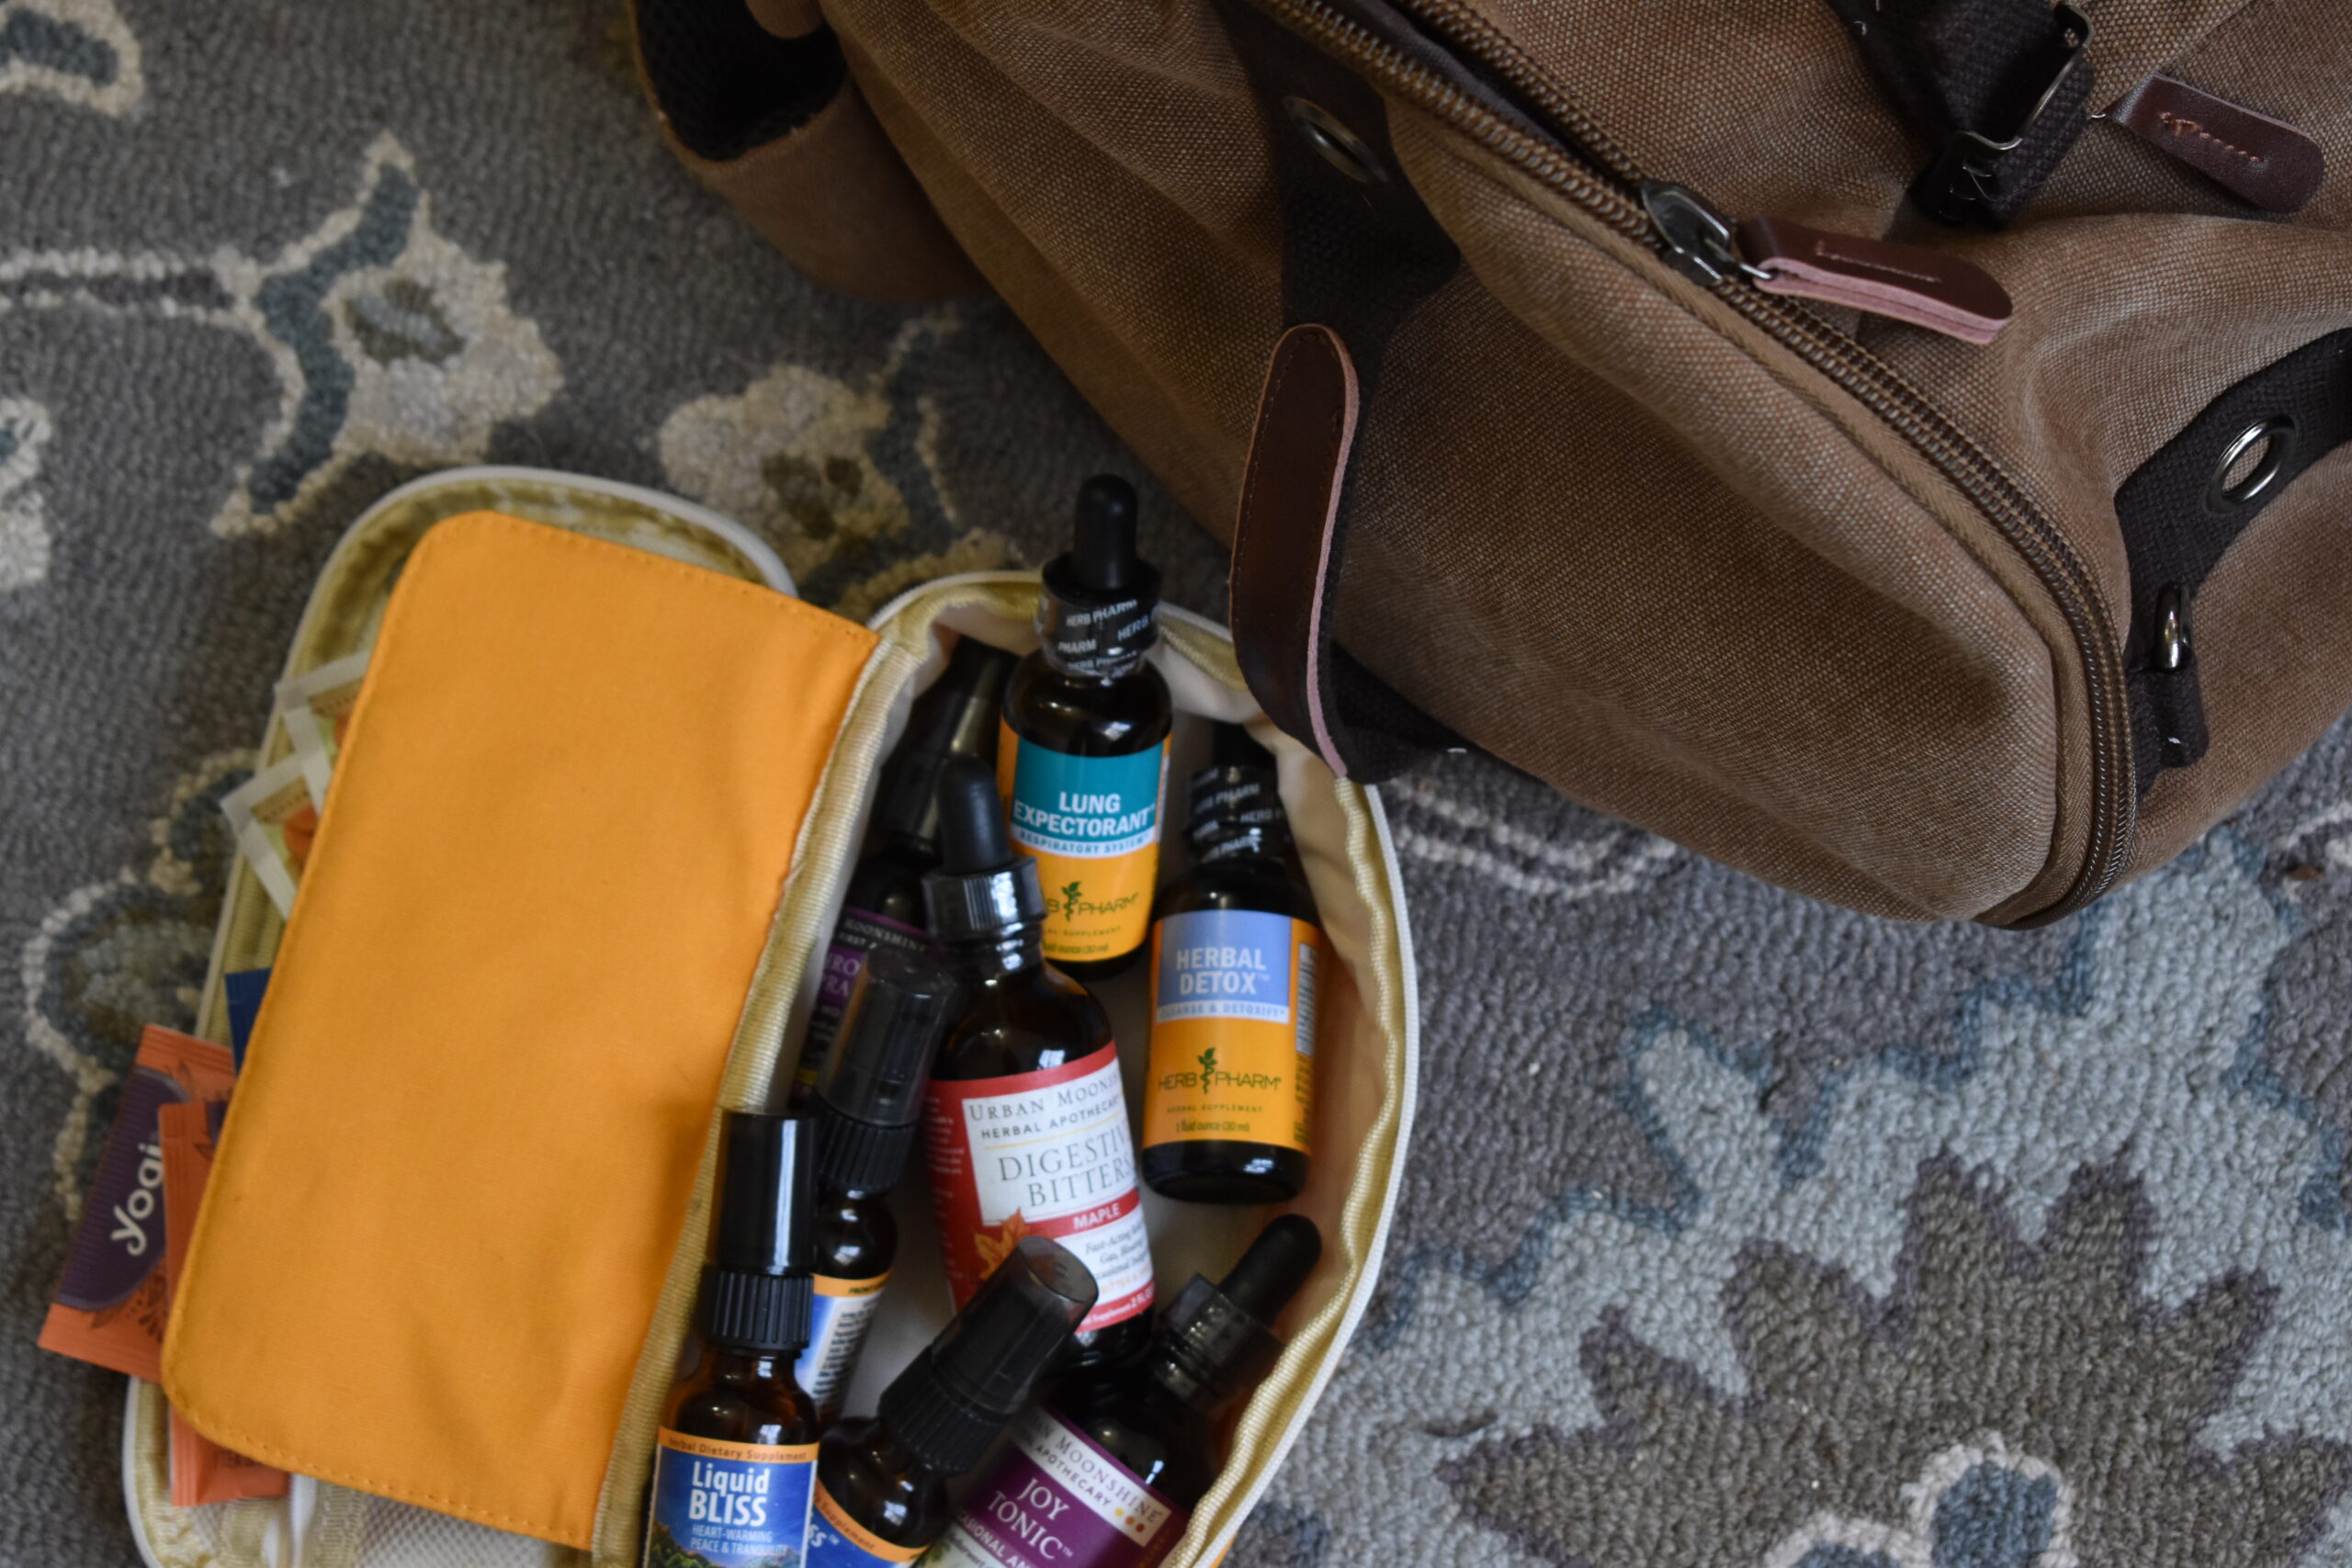 Herbs for emergencies to keep in your GOOD bag